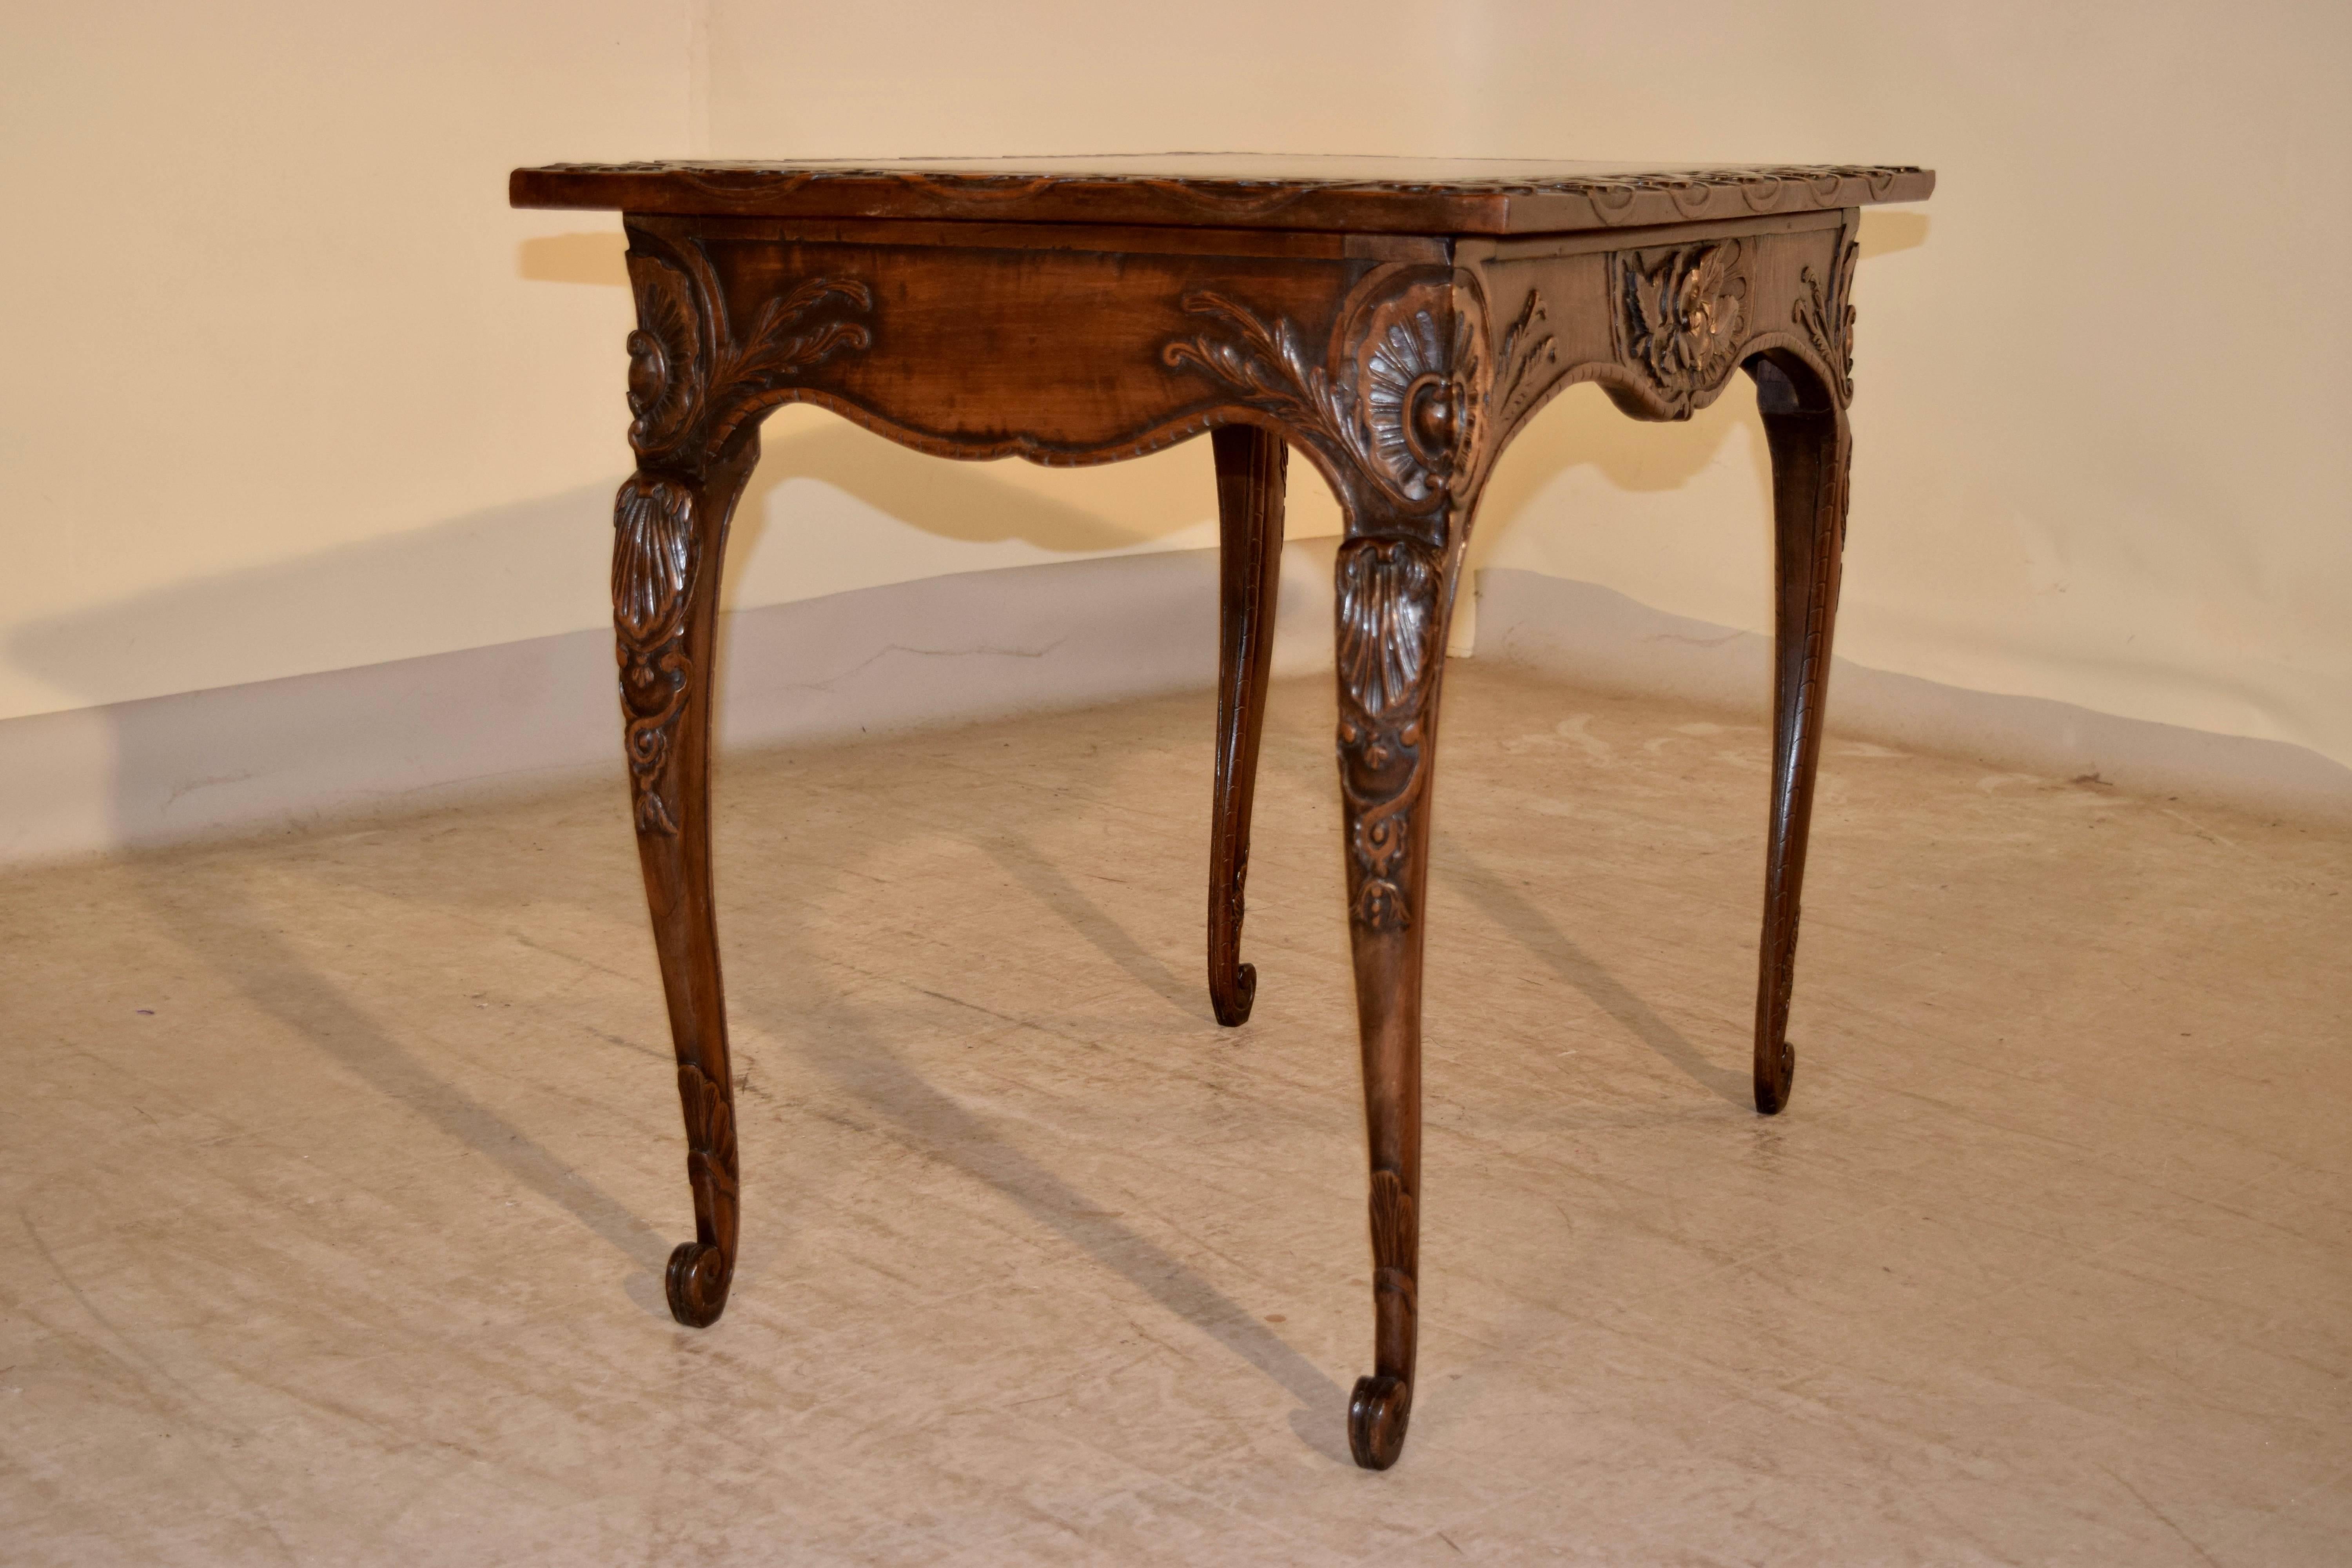 Hand-Carved Early 19th Century Irish Side Table